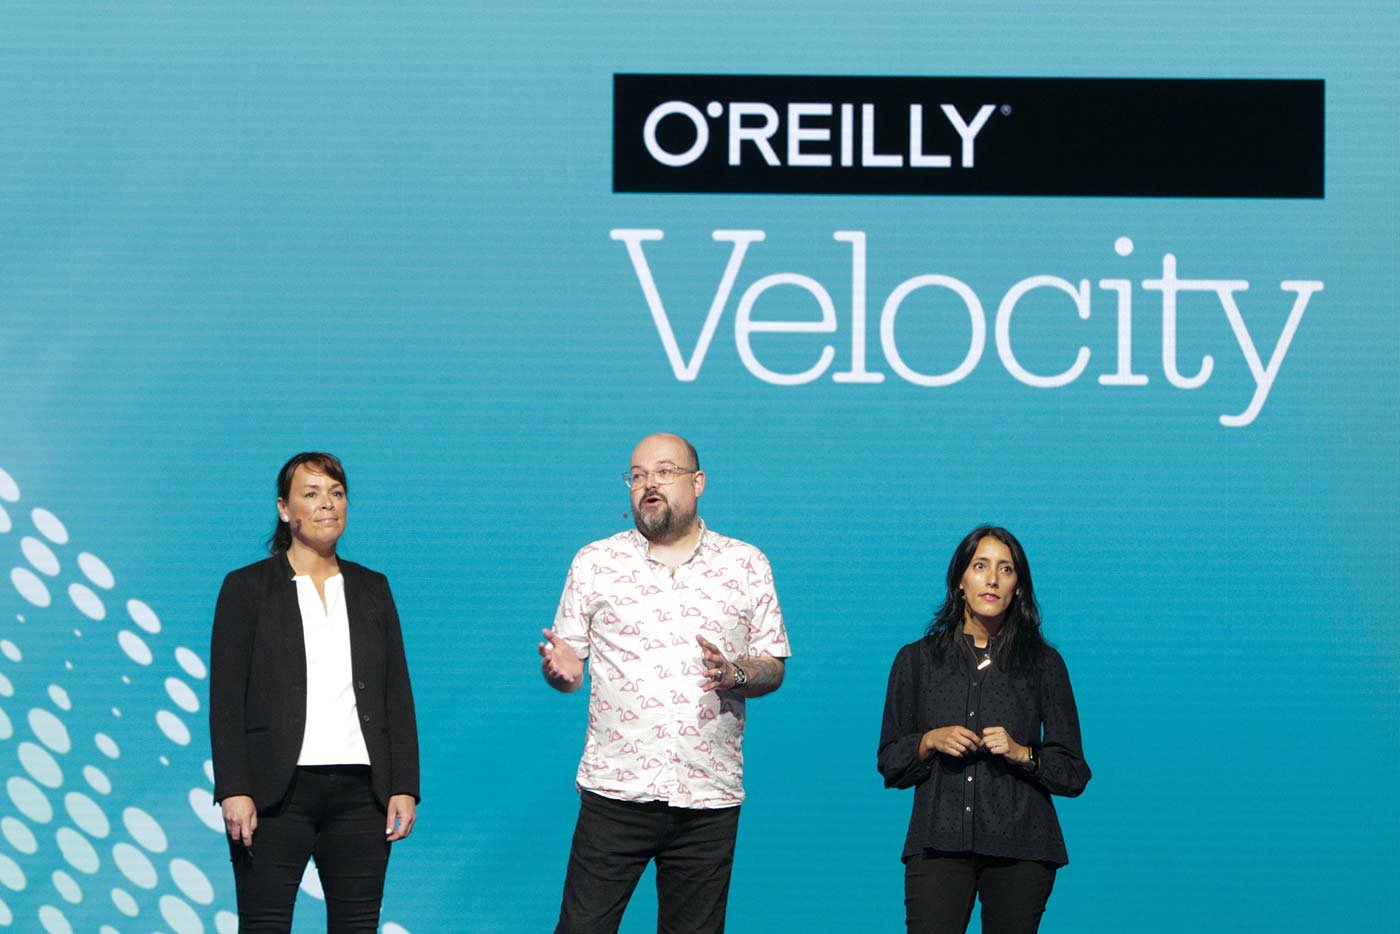 L to R: Velocity chairs Mary Treseler, James Turnbull, and Ines Sombra at the O'Reilly Velocity Conference in San Jose 2017.